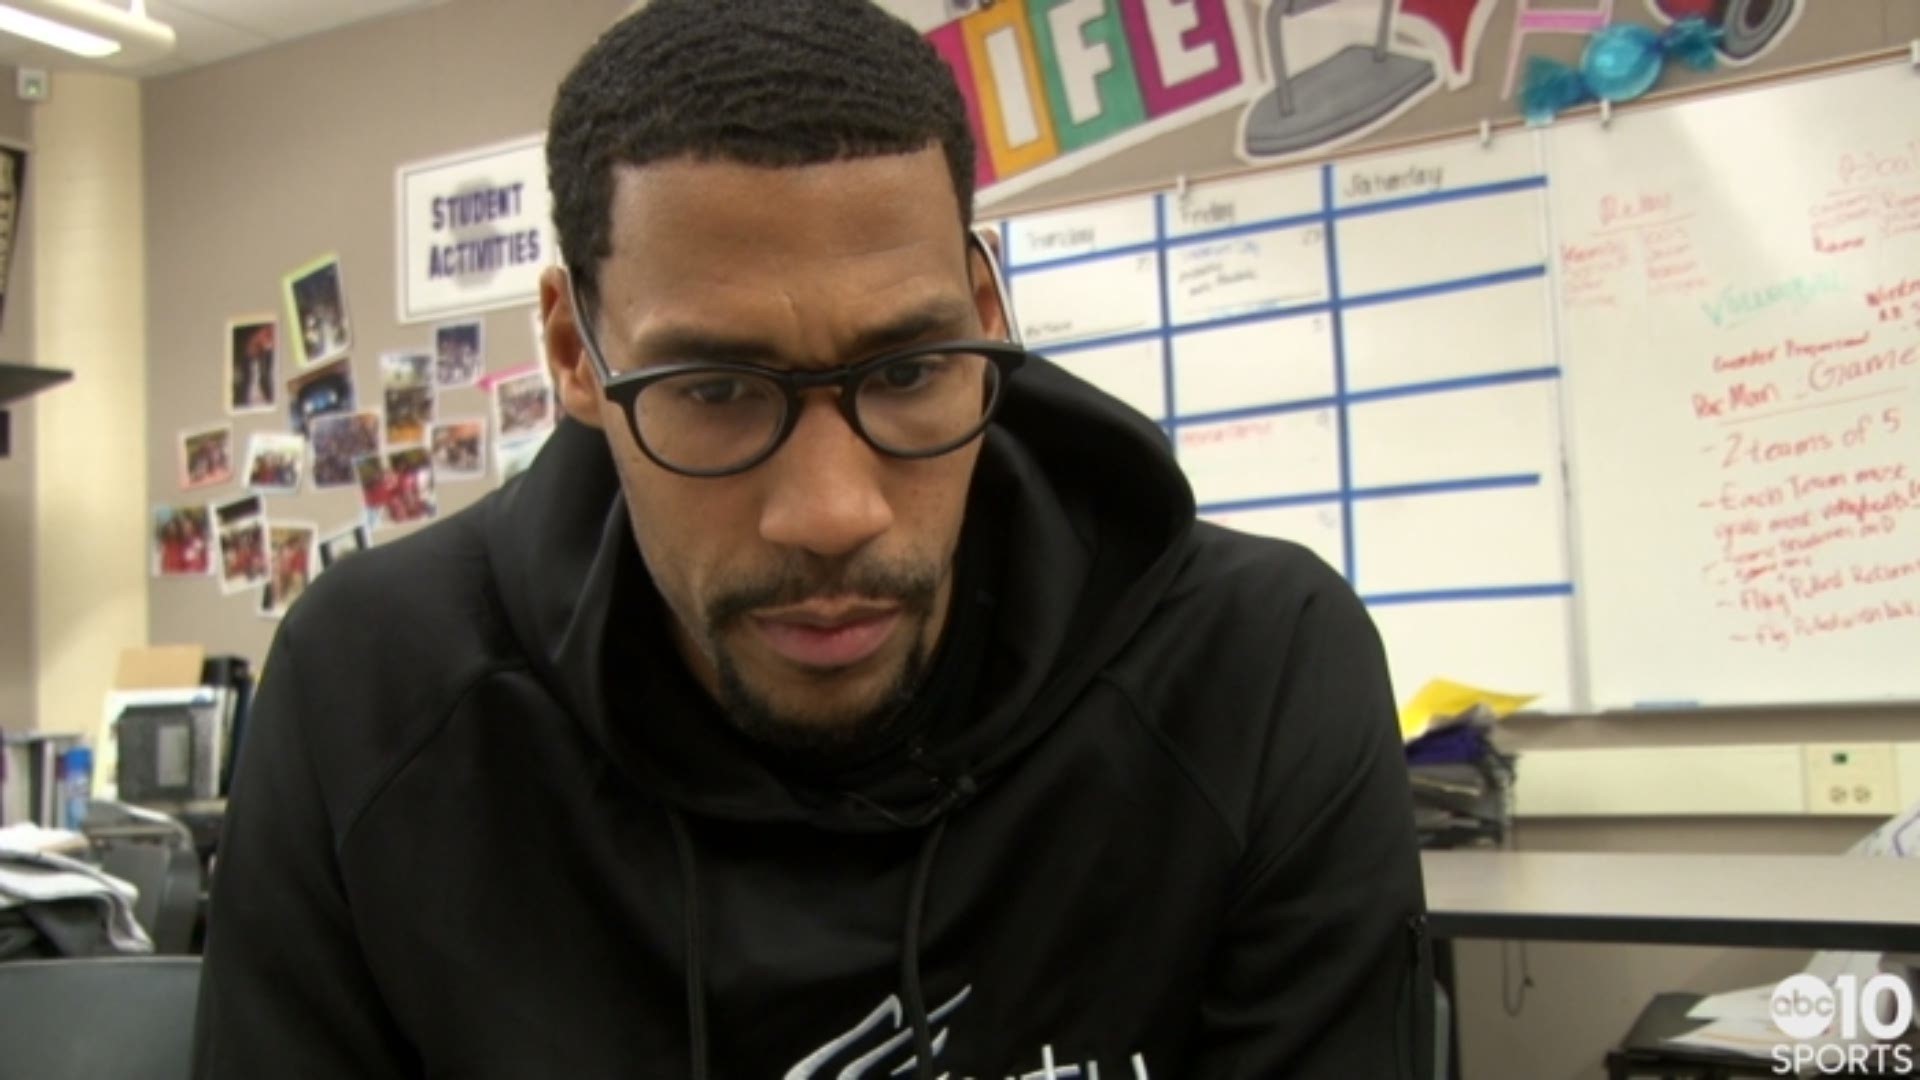 Kings forward Garrett Temple speaks with ABC10's Lina Washington about what he's hoping to accomplish at Sacramento High School with his many visits throughout the season and his group conversations with students.